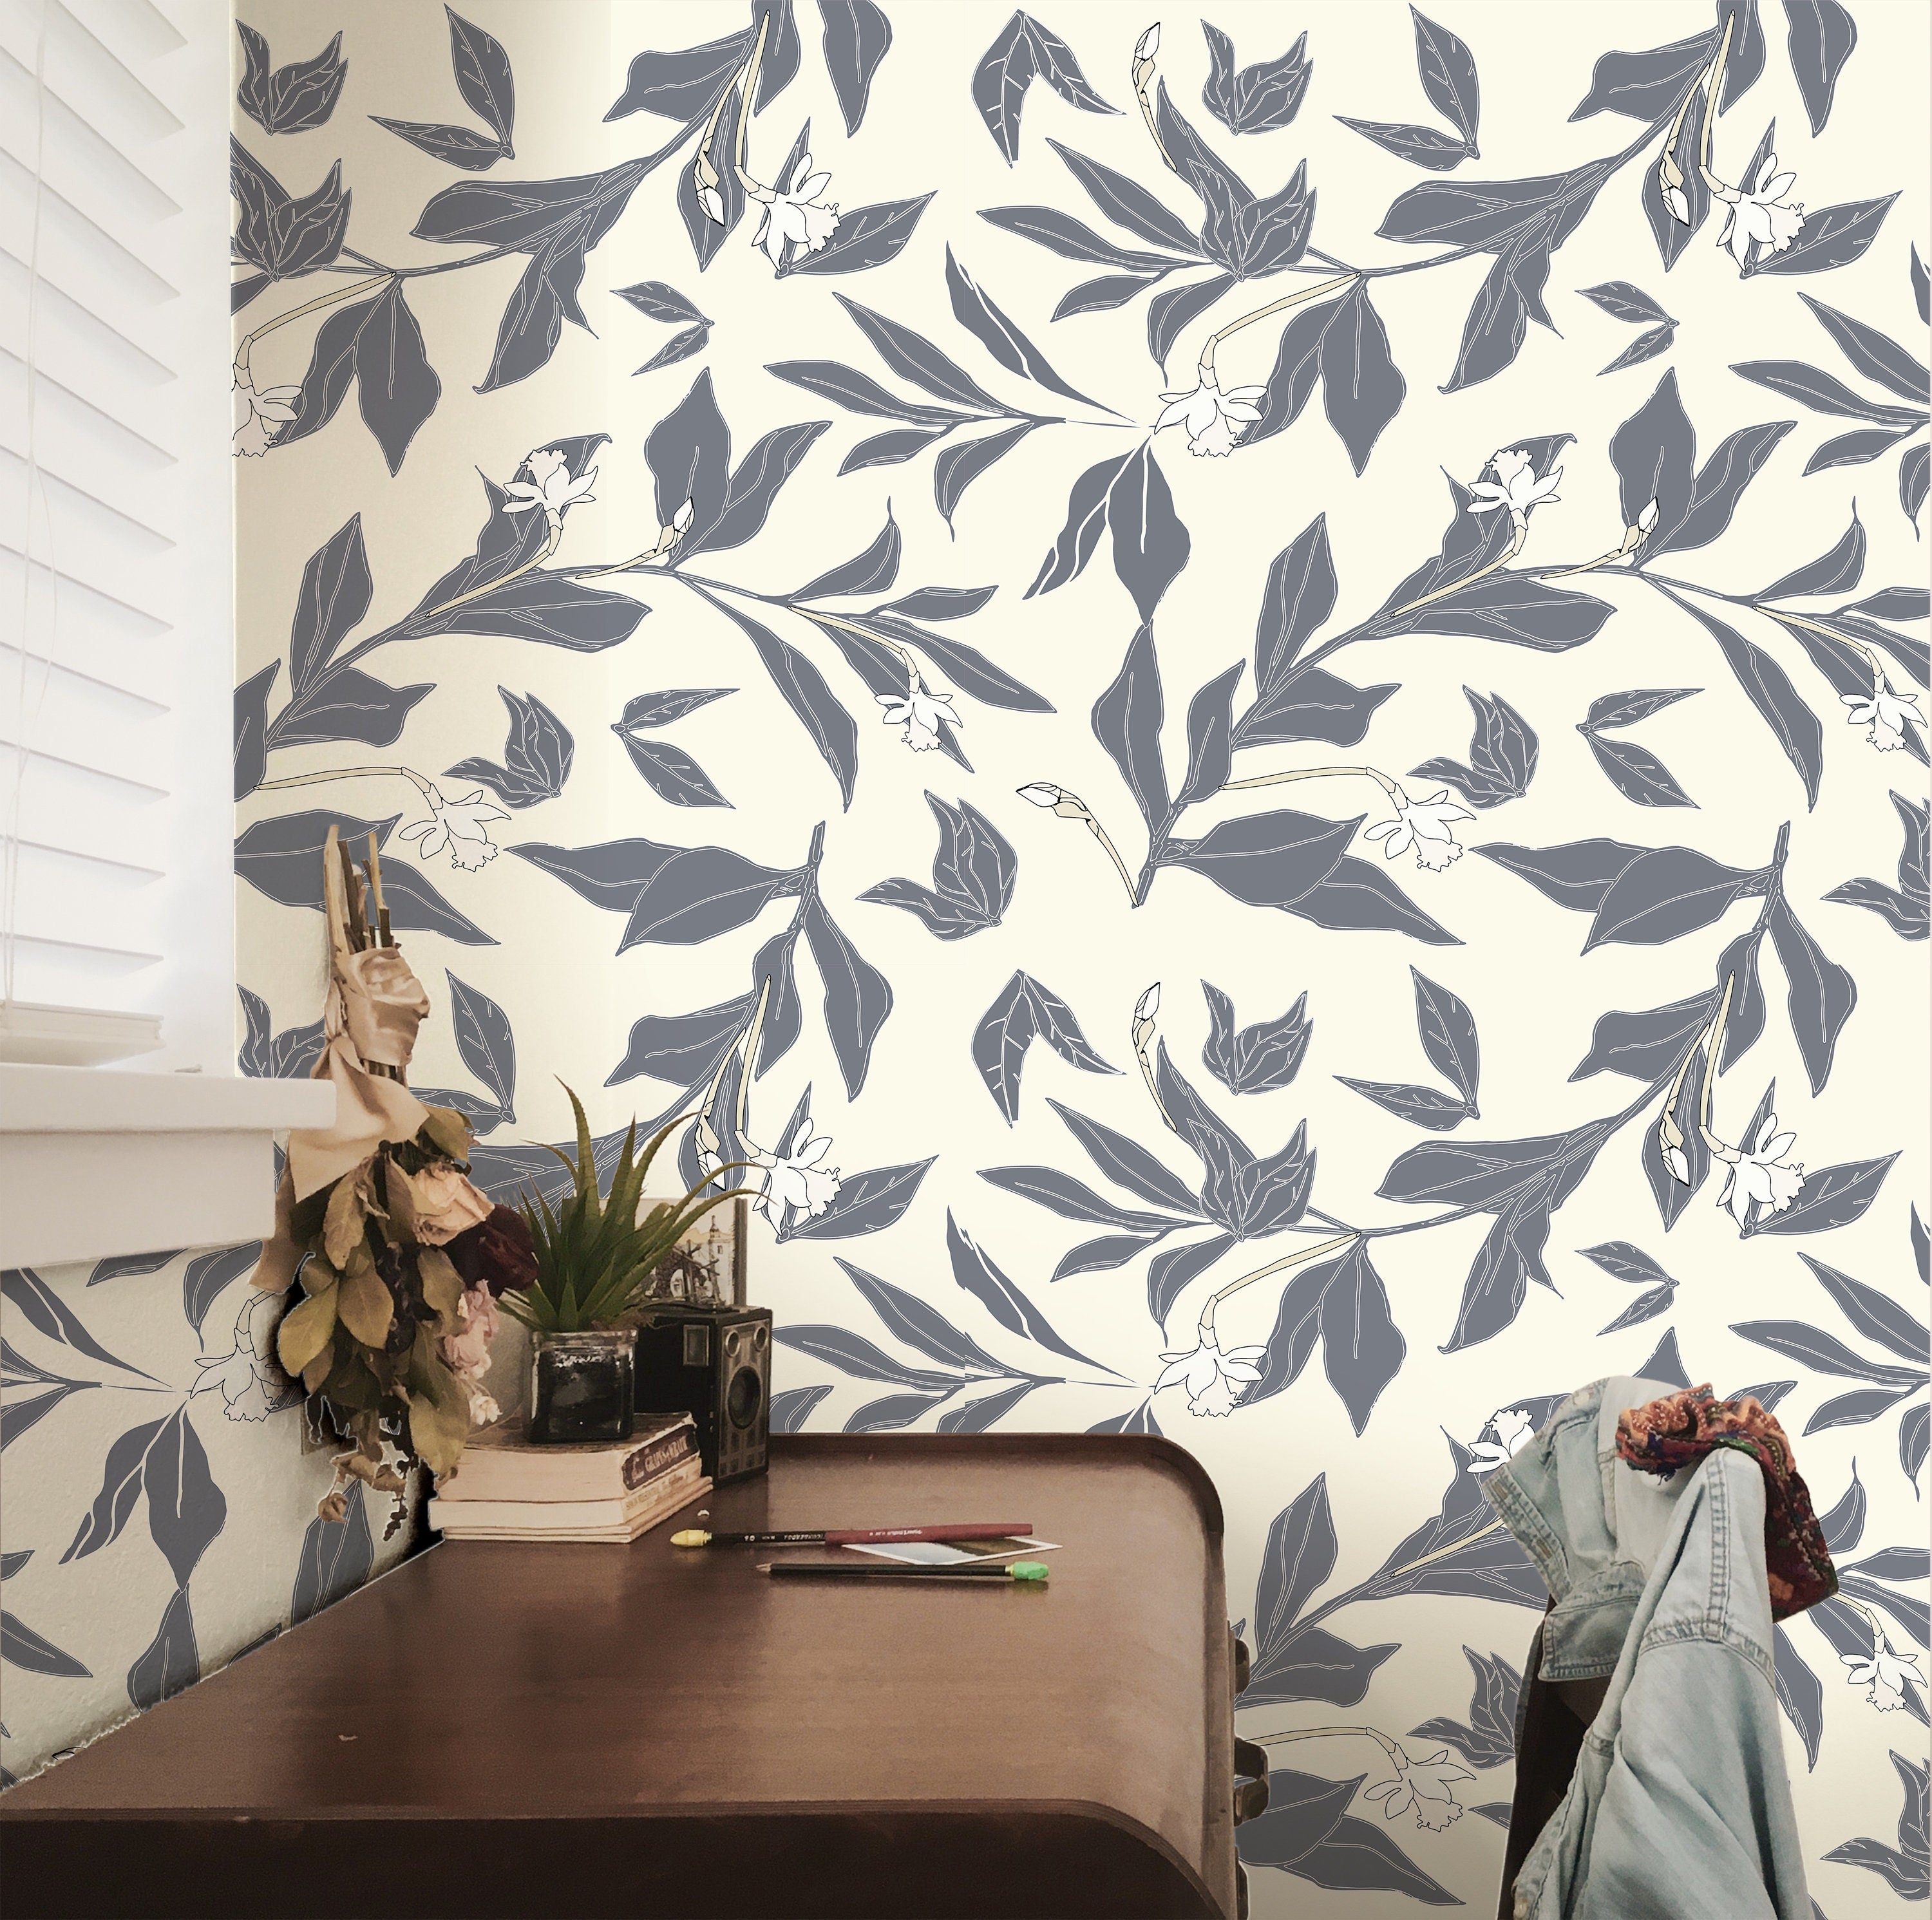 Ivory Gray Floral Wallpaper | Wallpaper Peel and Stick | Removable Wallpaper | Peel and Stick Wallpaper | Wall Paper Peel And Stick 2074 - JamesAndColors